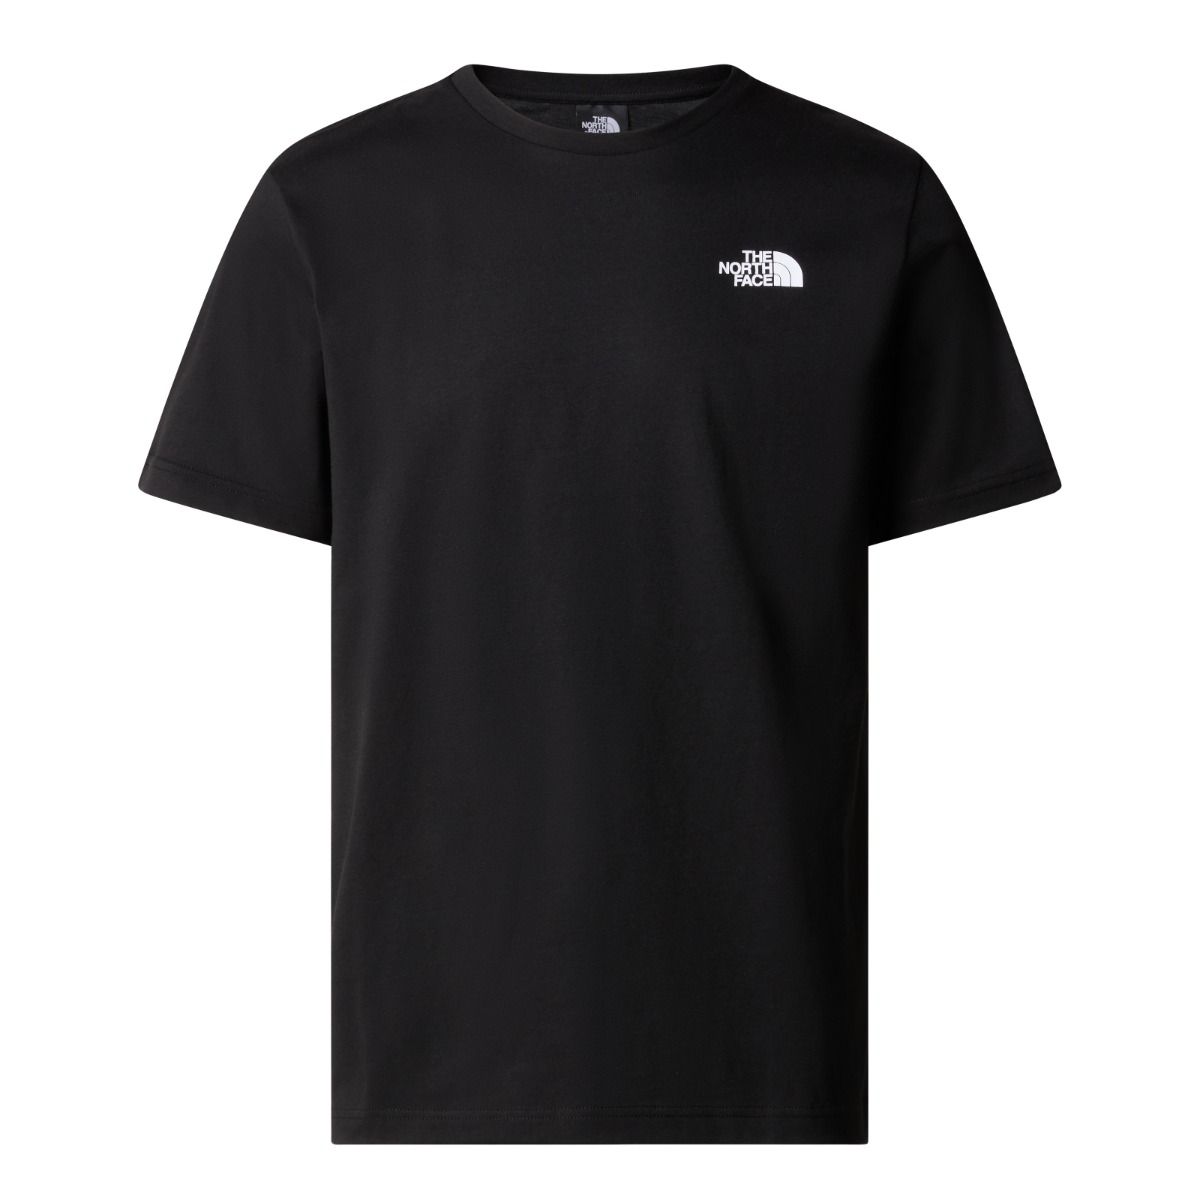 The North Face - M's S/S REDBOX TEE